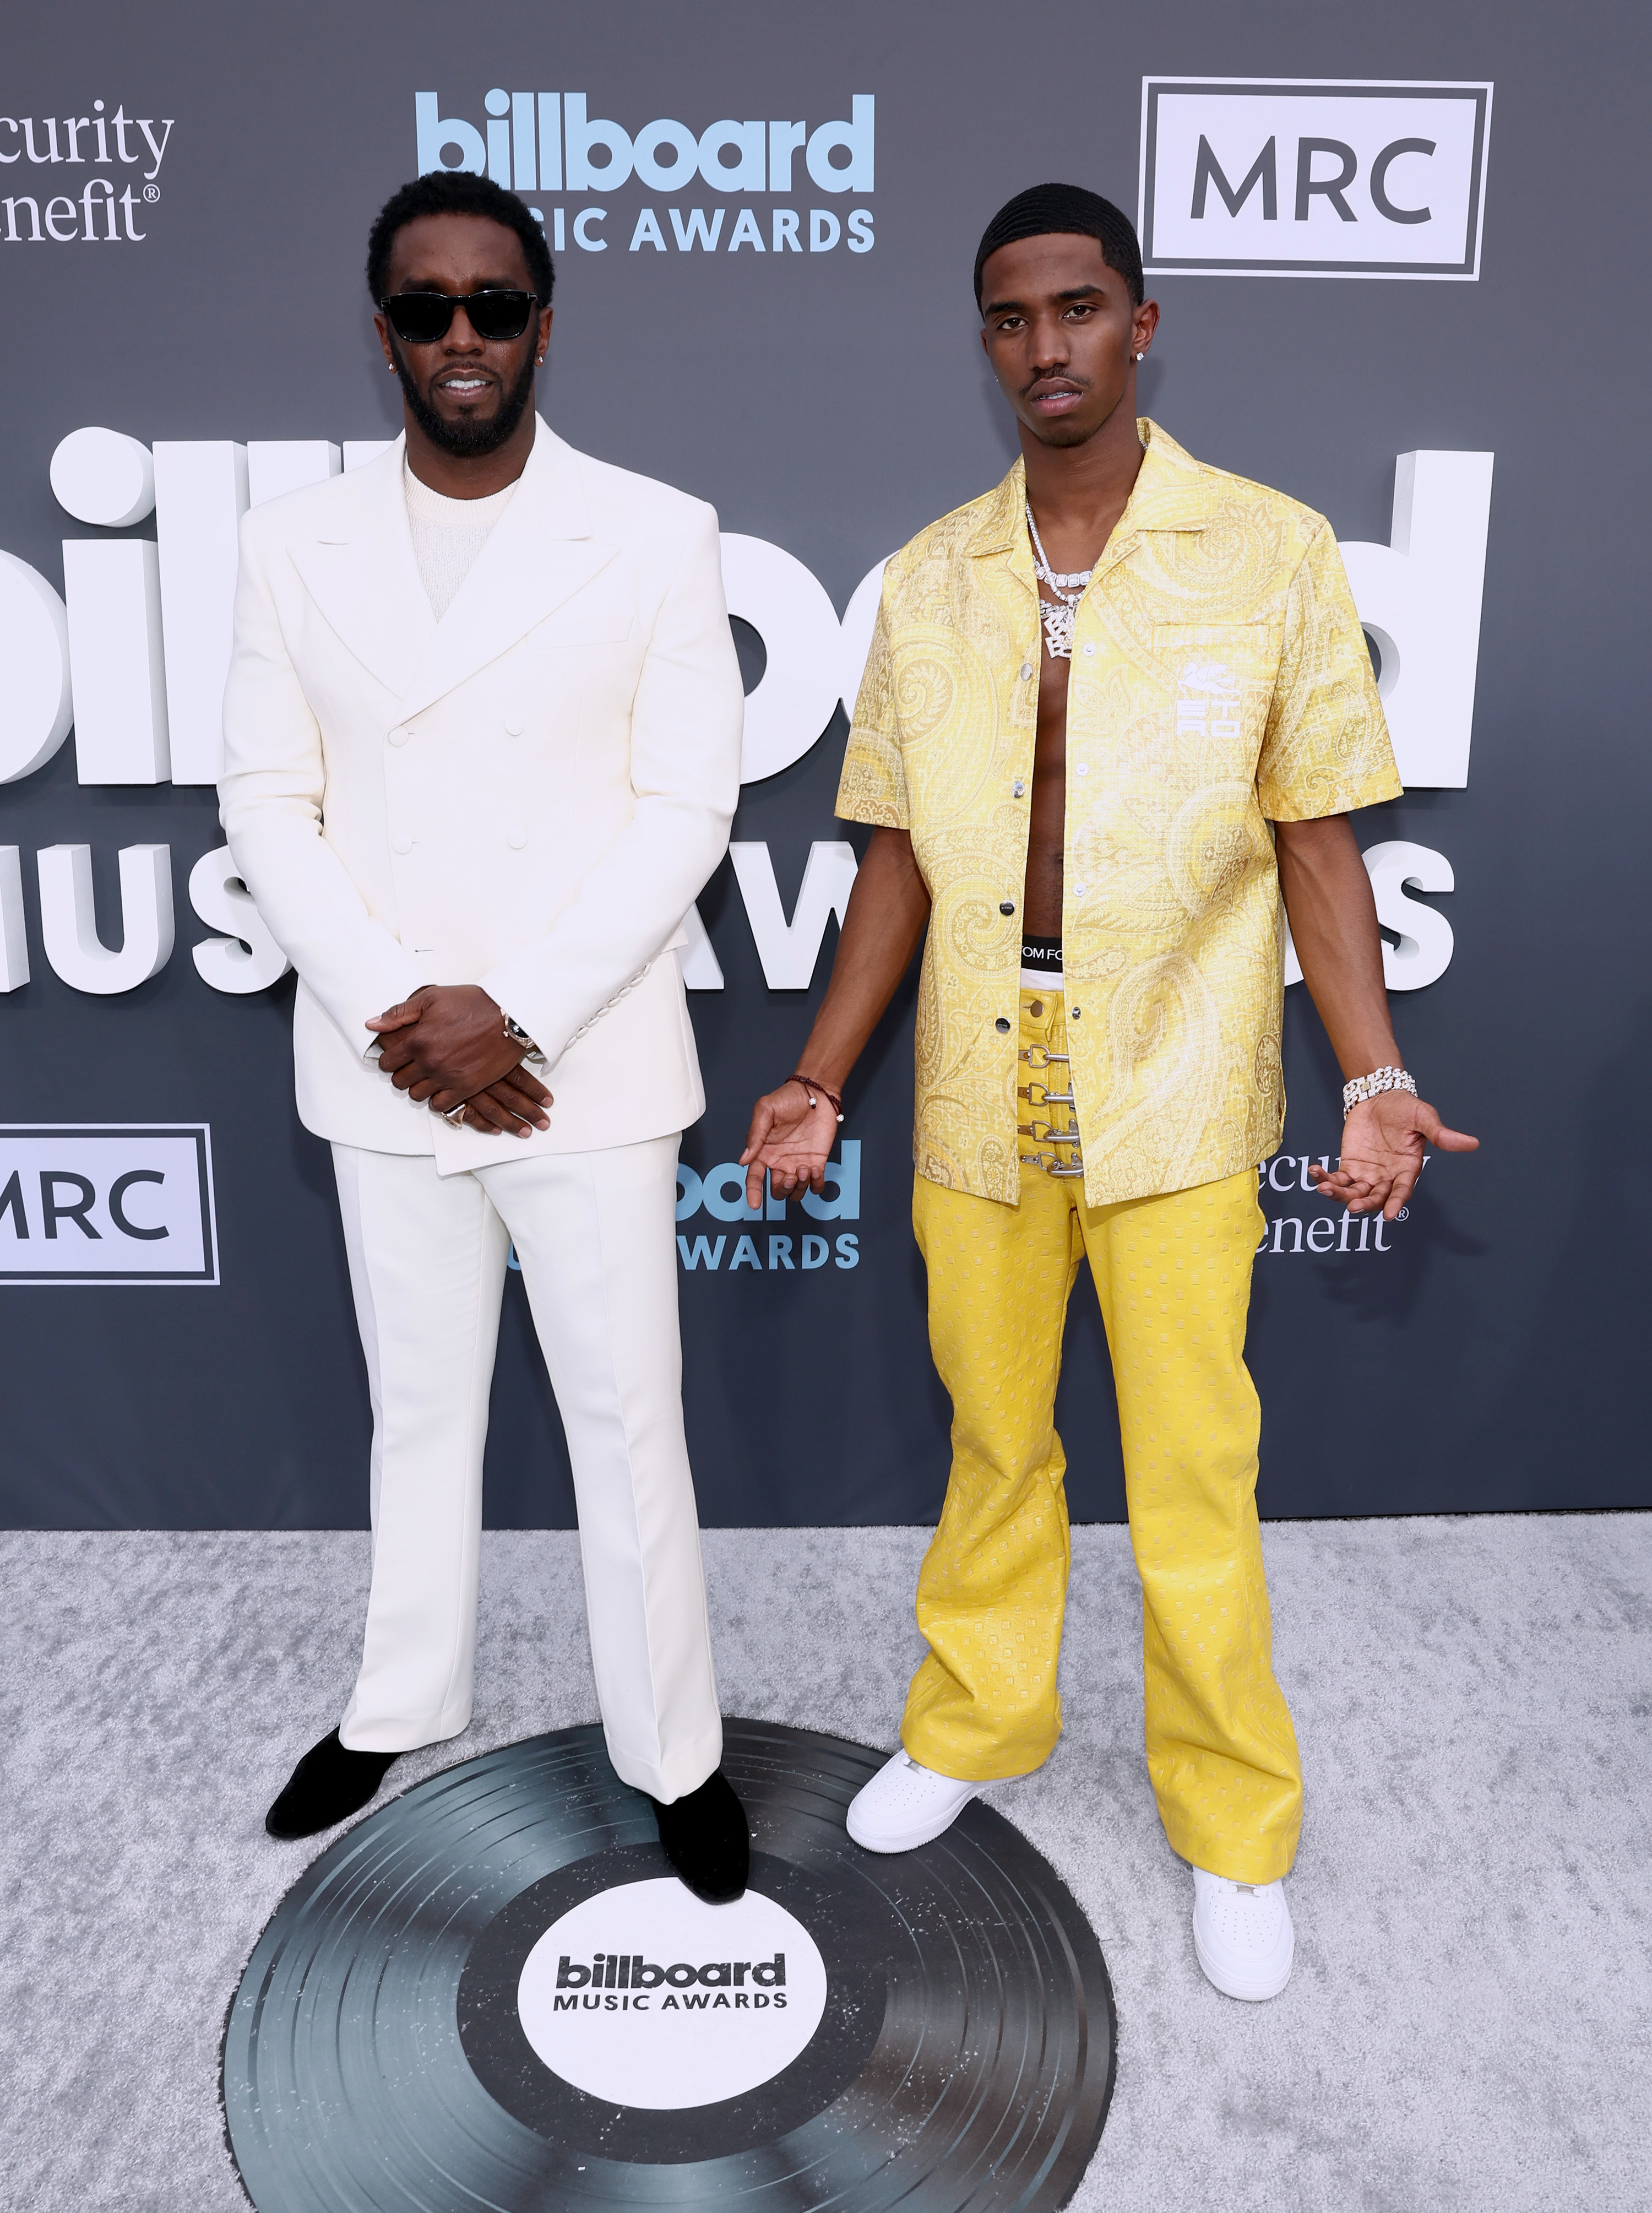 Sean and Christian Combs